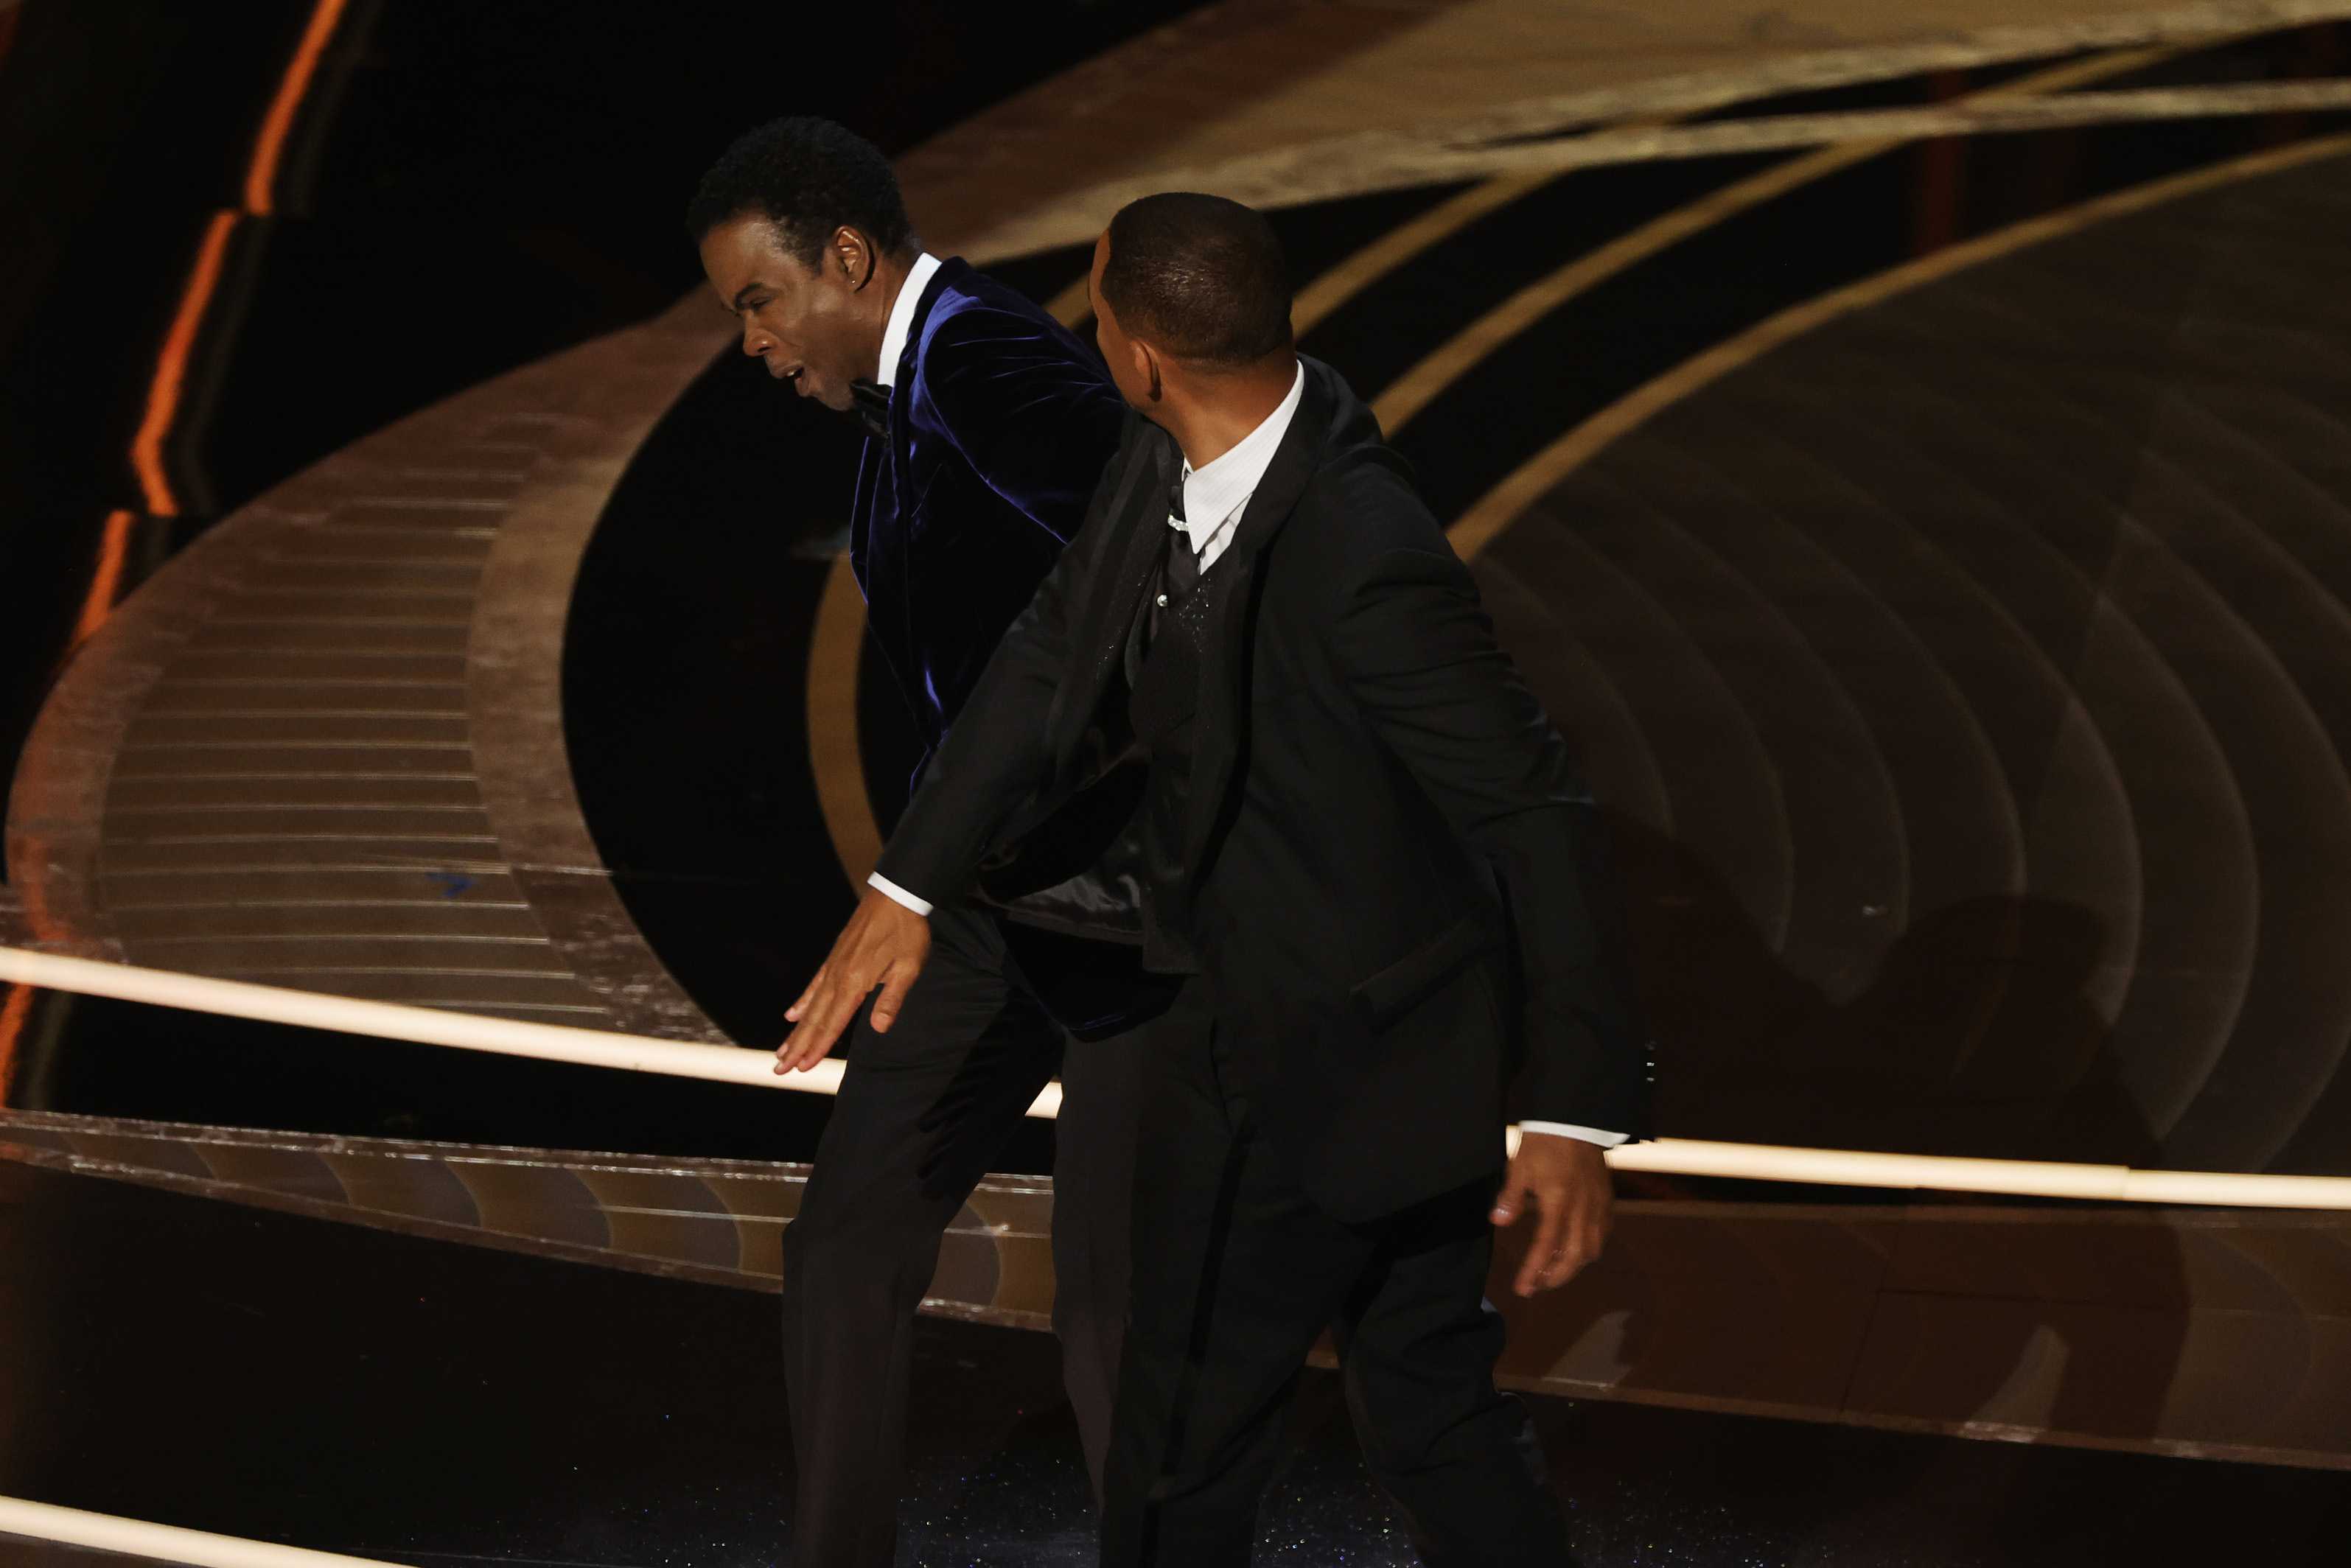 Will Smith slaps Chris Rock during the Oscars after joke about Smith's wife  ⋆ 4State News MO AR KS OK